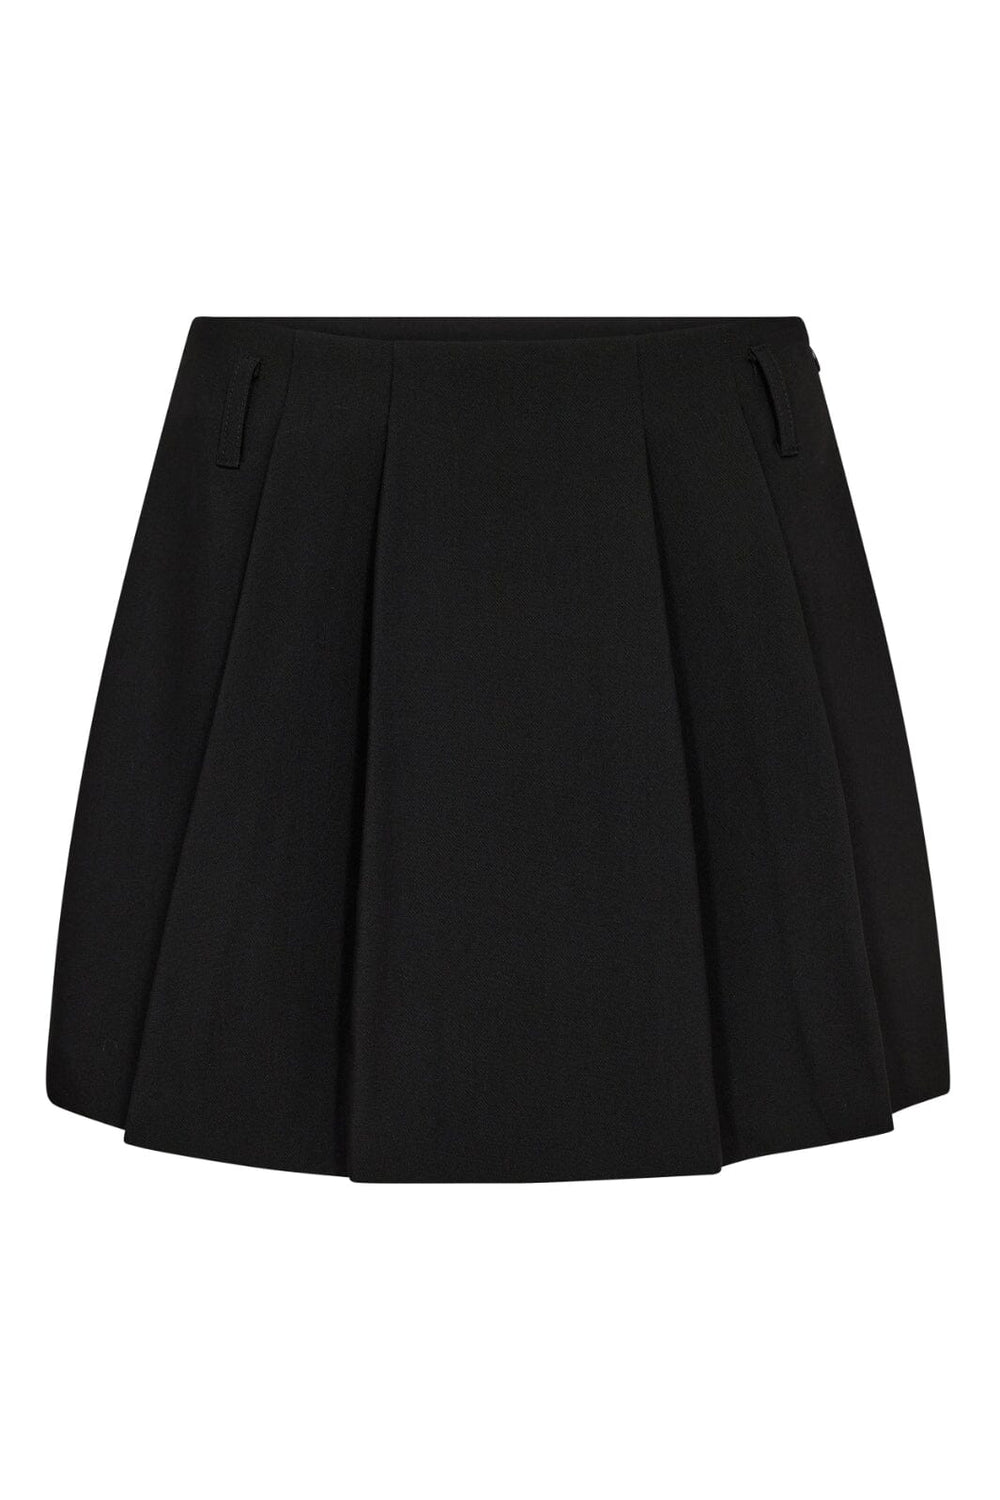 Forudbestilling - Co´couture - Volacc Pleat Skirt - 96 Black Nederdele 